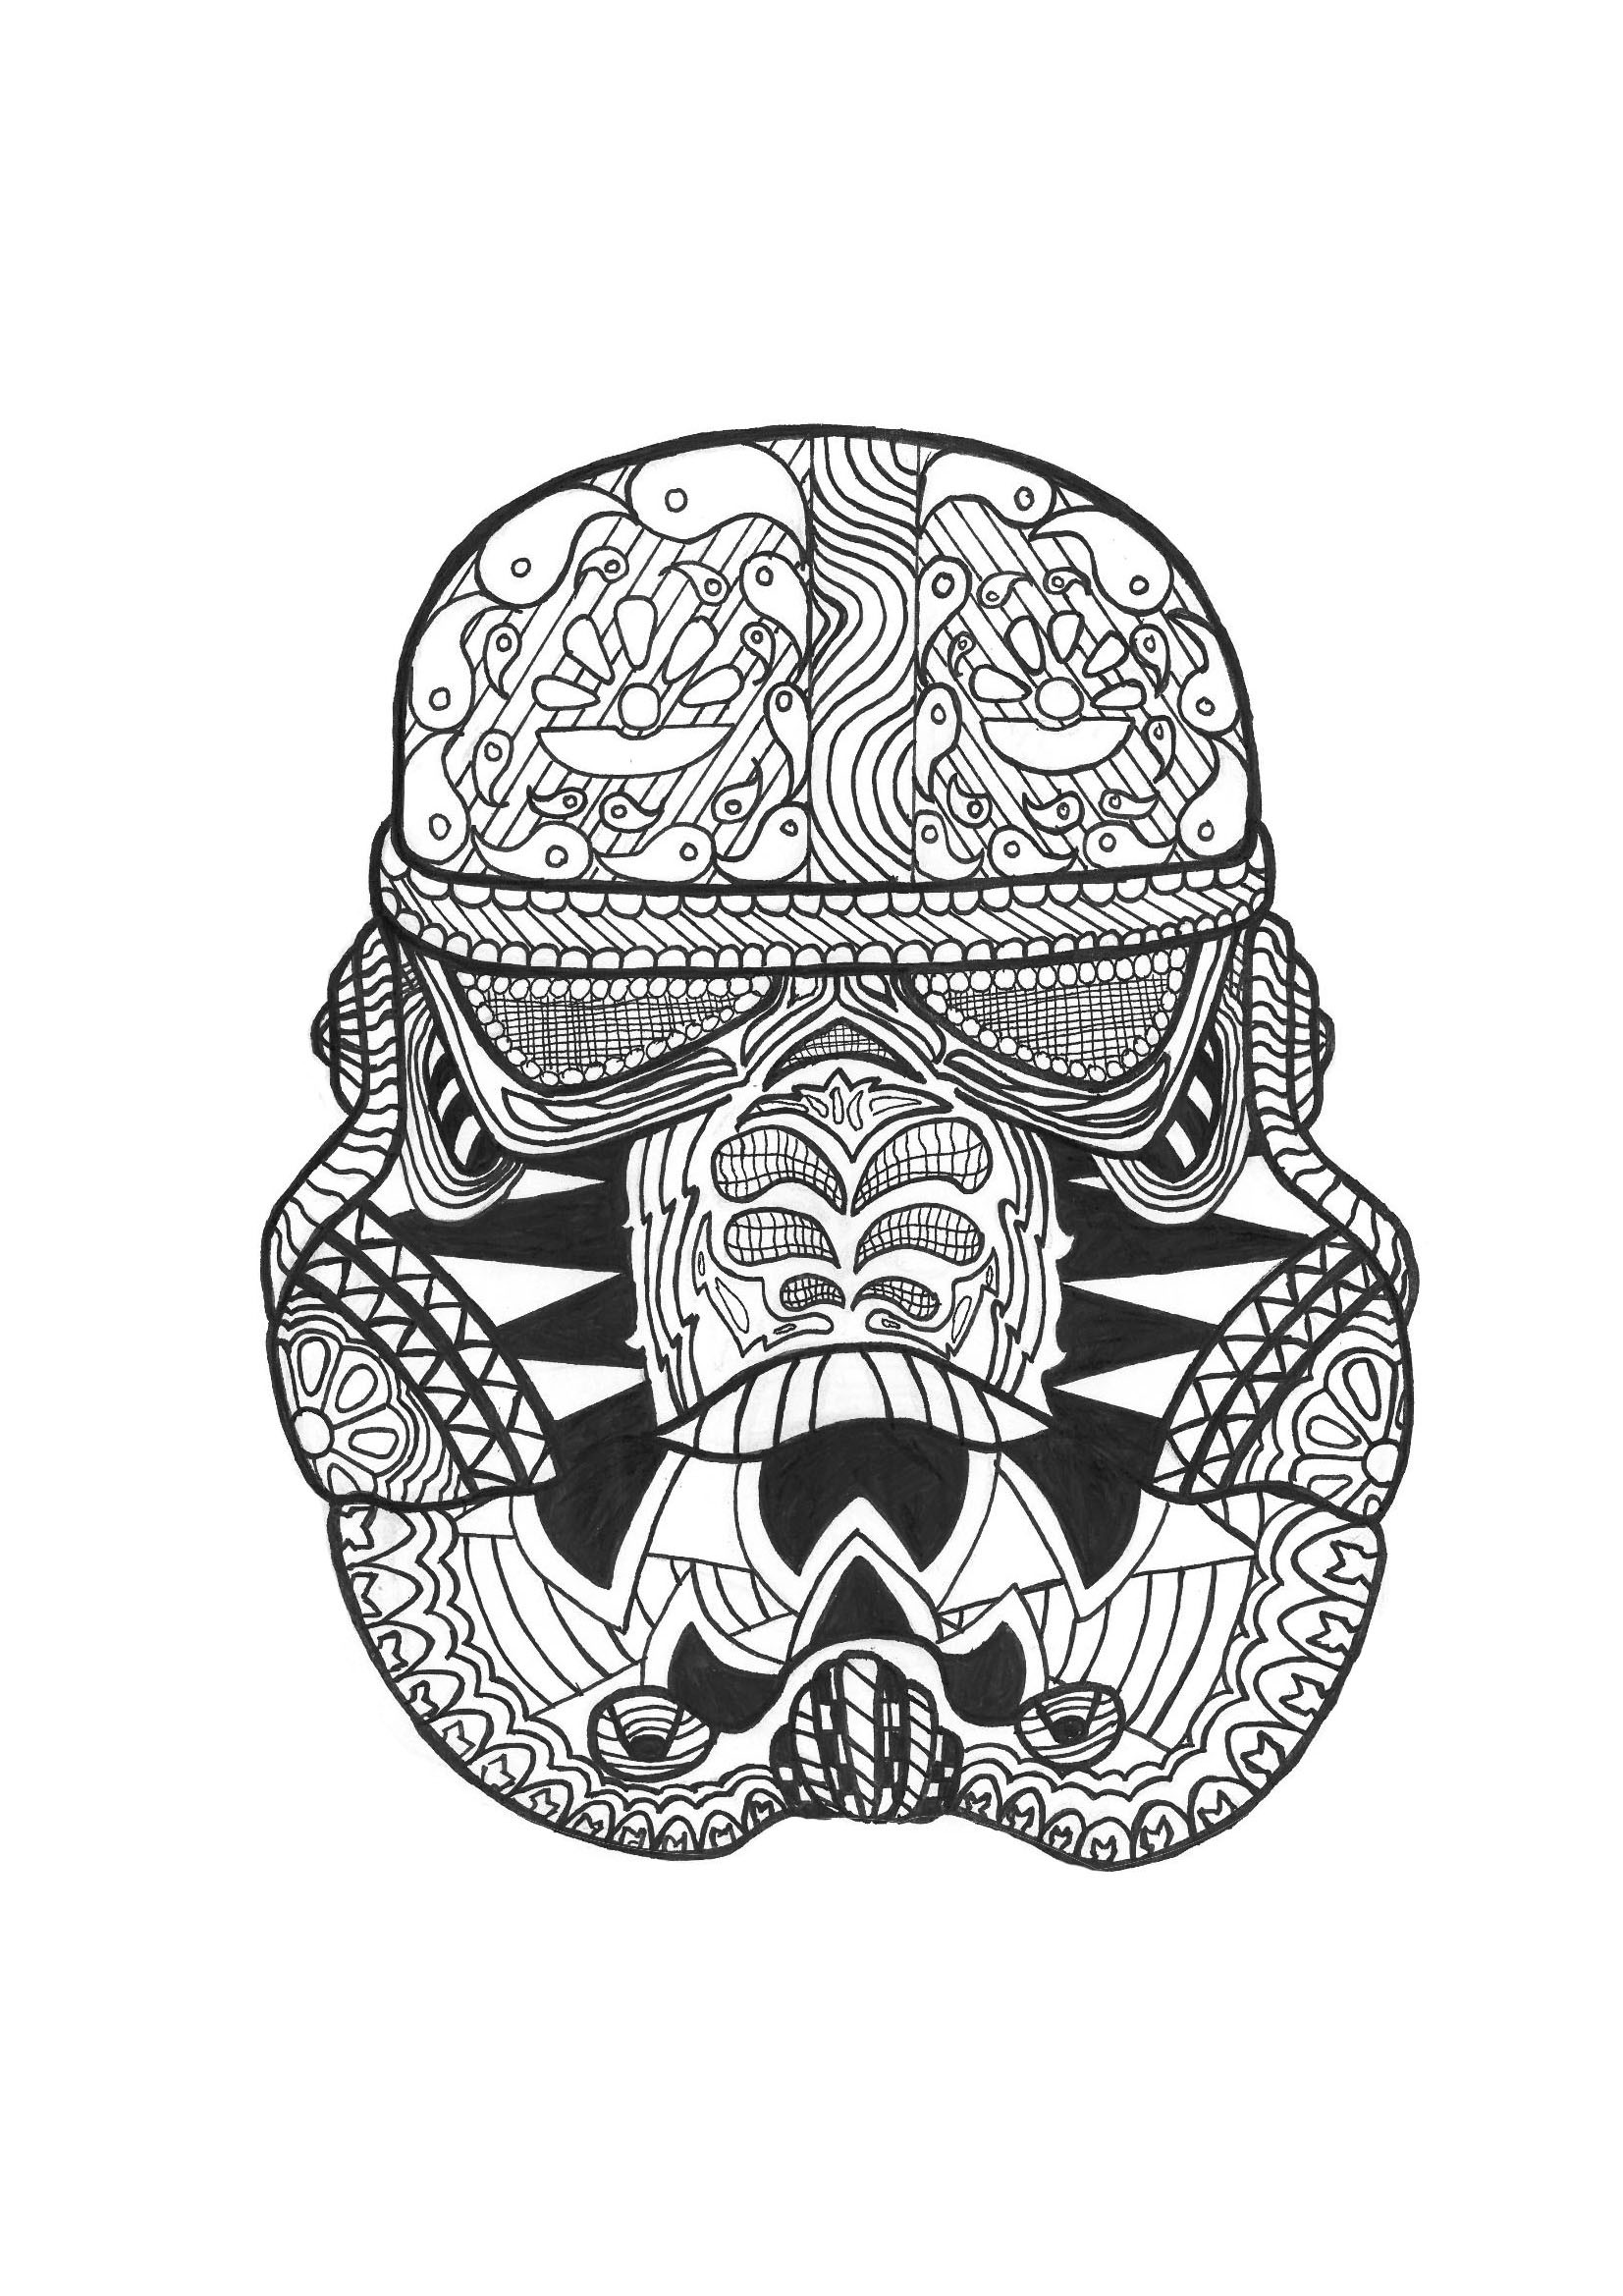 Coloring Books For Male Adults
 Zen stormtrooper Anti stress Adult Coloring Pages